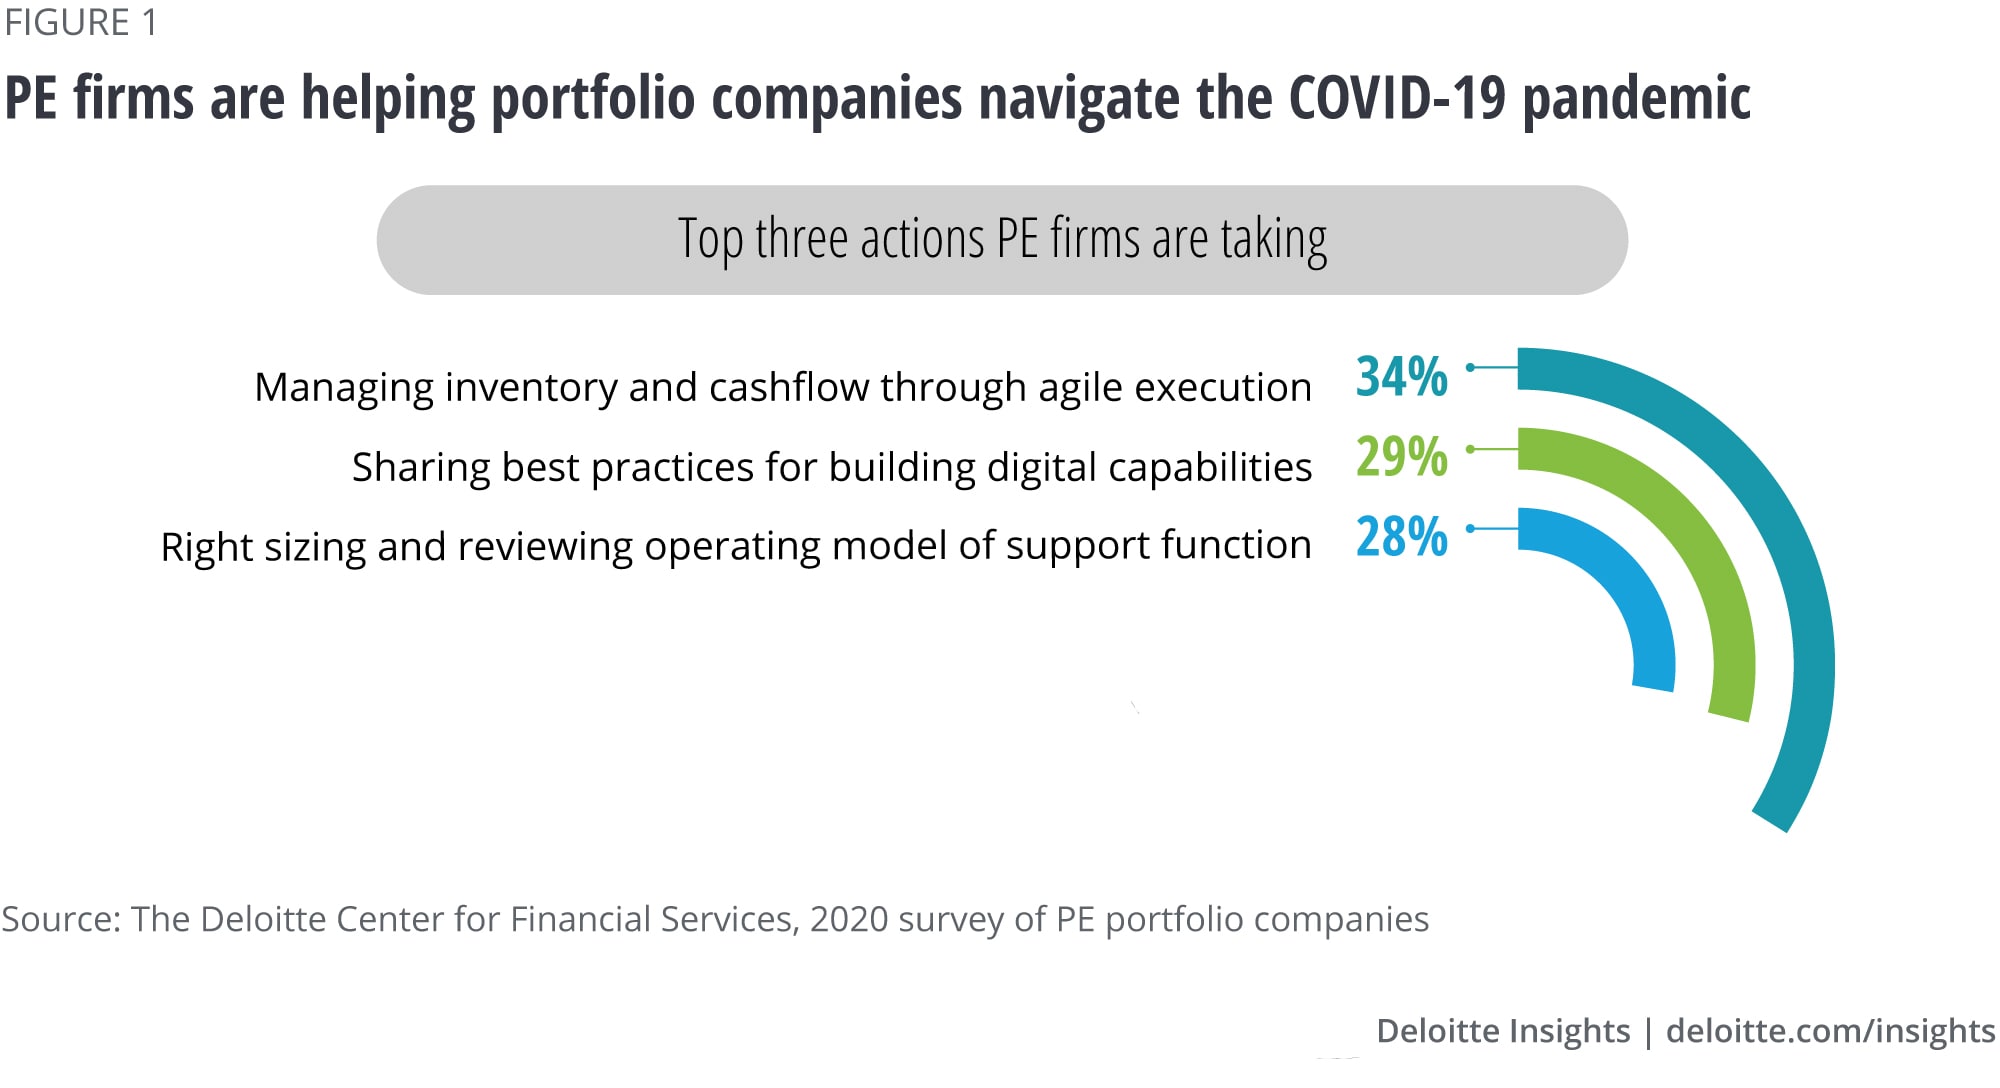 Top actions taken by PE firms to help portfolio companies